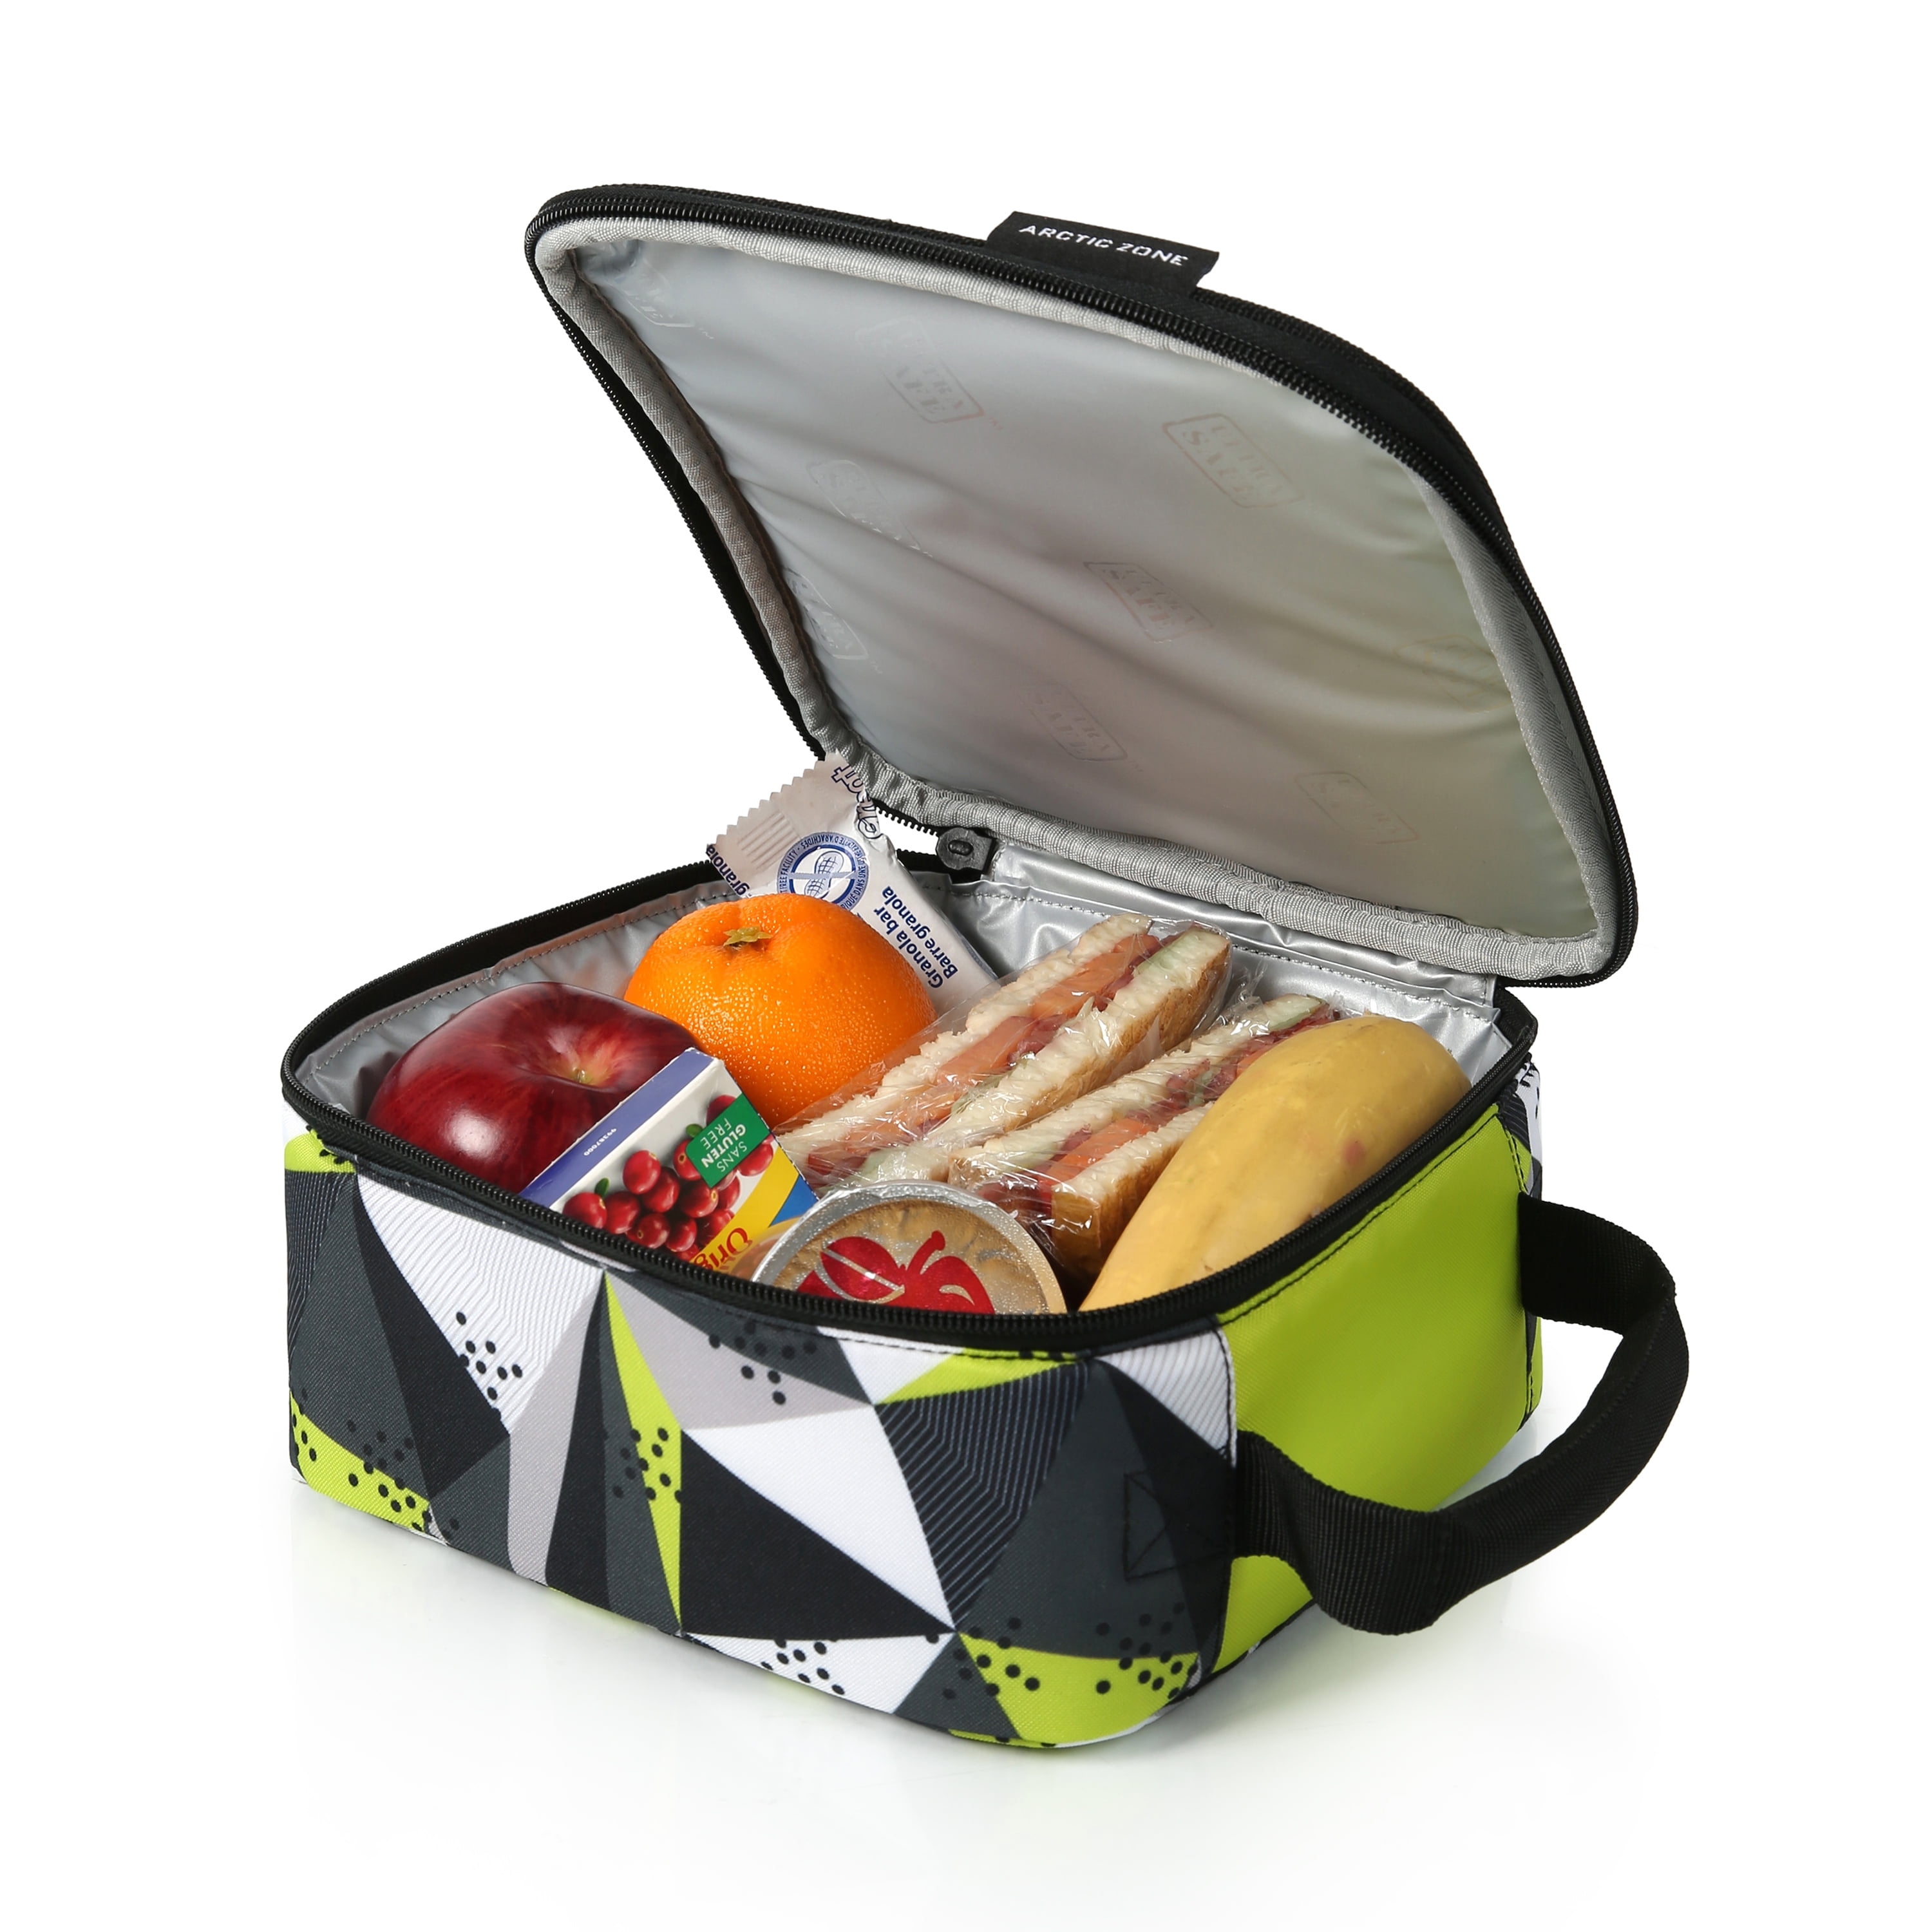 Arctic Zone Upright Reusable Lunch Box Combo with Accessories, Owls 